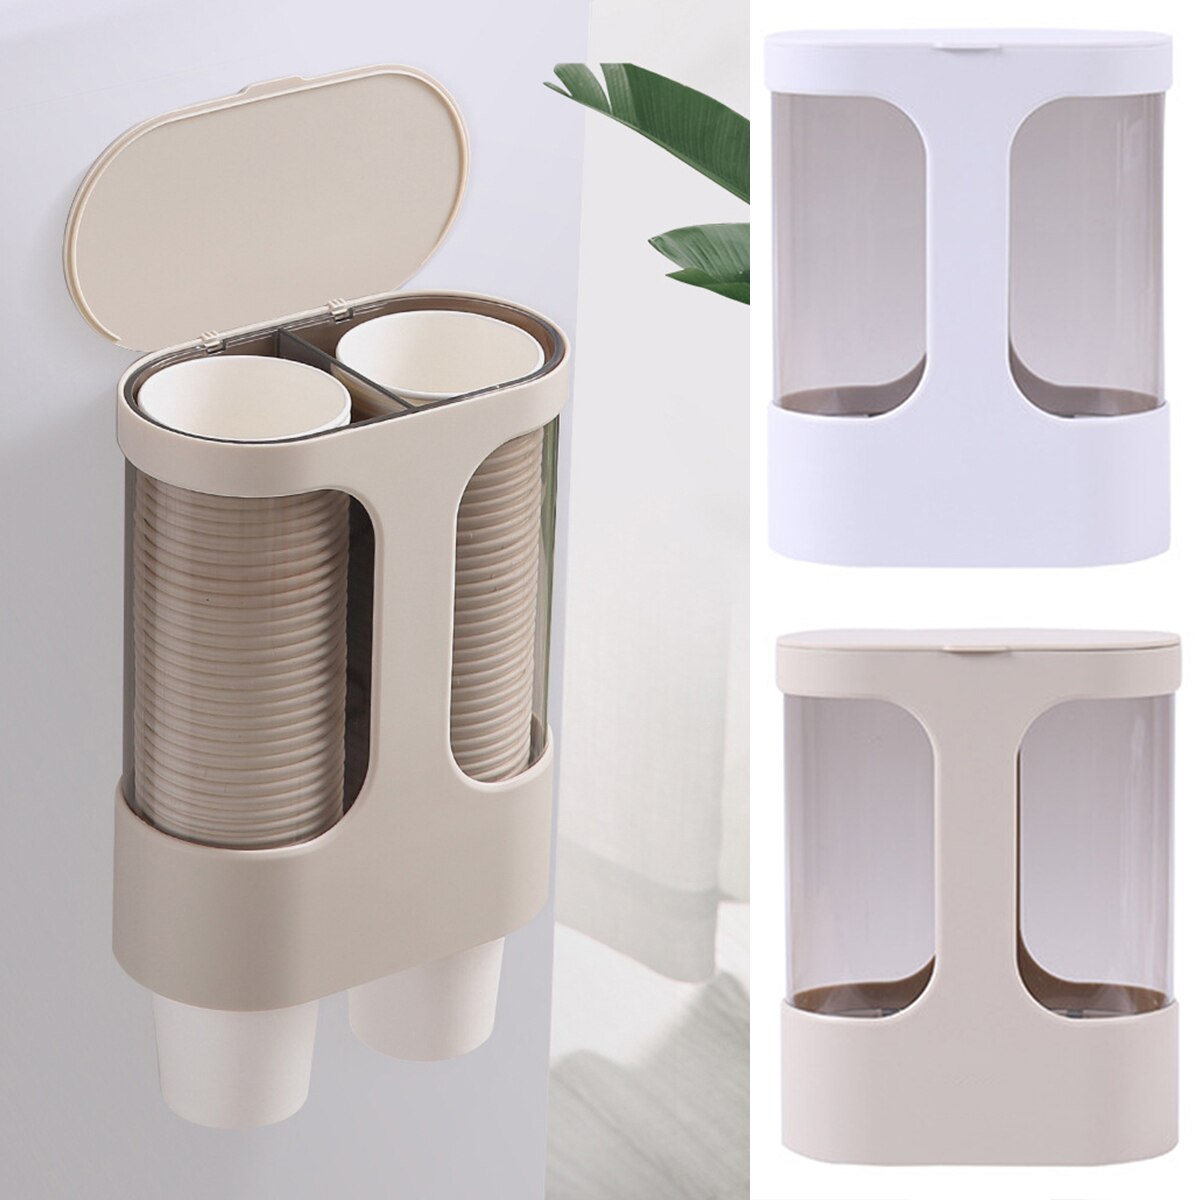 Transparent Cup Dispenser Double Tube Wall-Mount Paper Cup Rack Pull Type Disposable Holder Dustproof Dispenser Paper Cup Holder